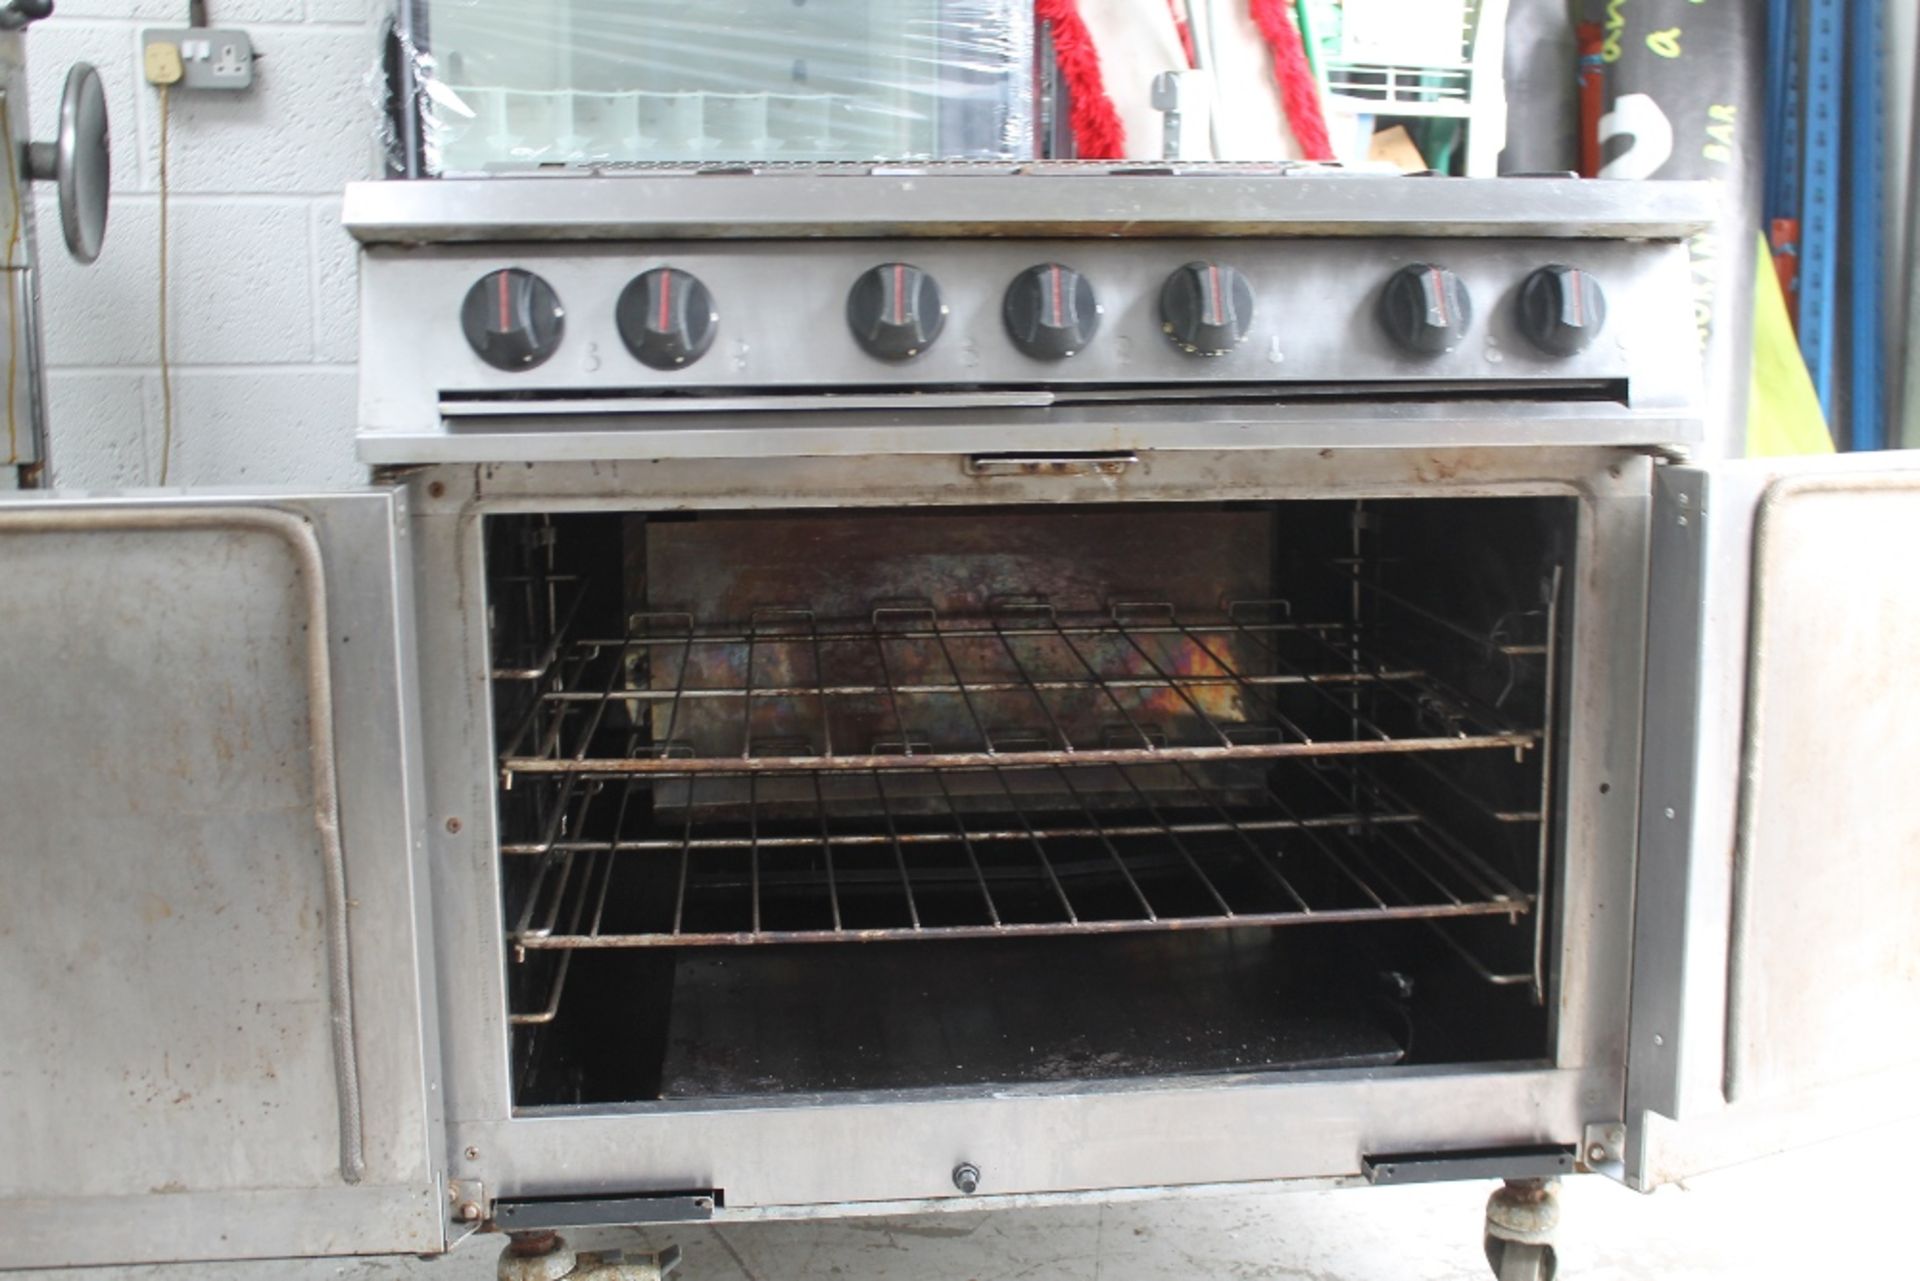 Falcon Dominator 6 Burner Gas Cooker with Oven – Tested – NO VAT   Model G21070T - serial no: - Image 4 of 5